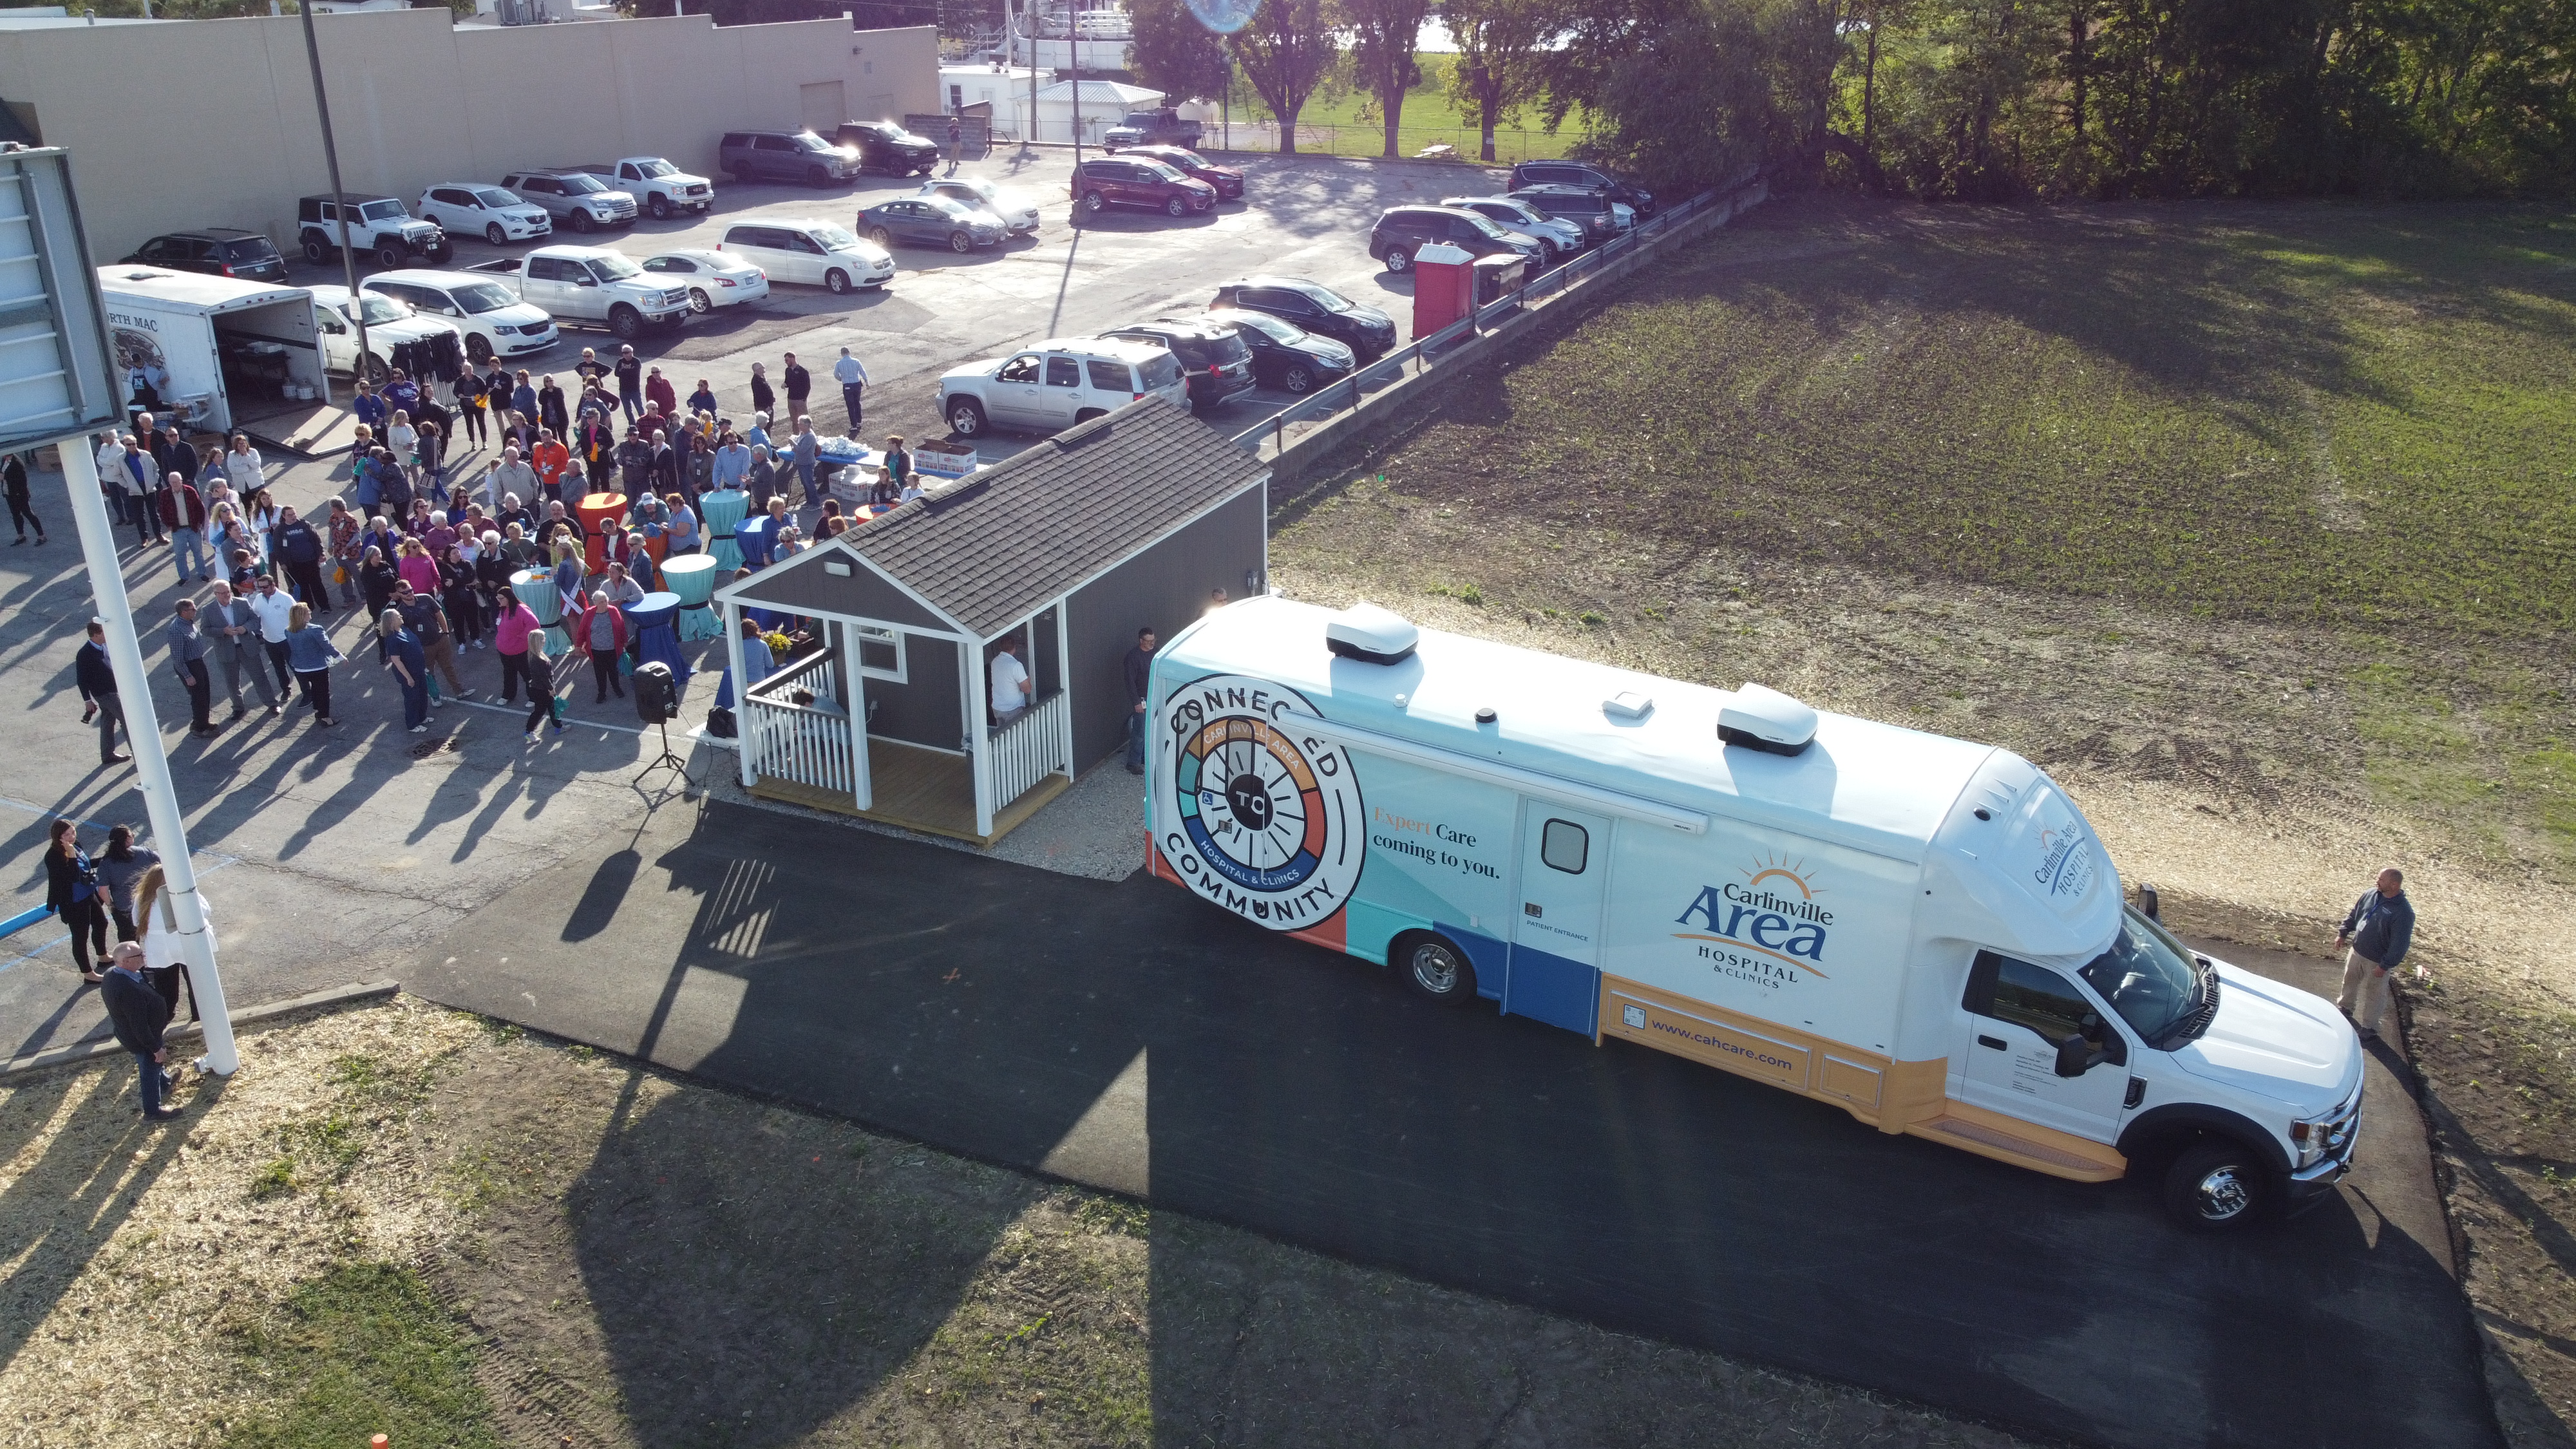 Mobile Medical Clinic parked in Virden, IL with large crowd gethered